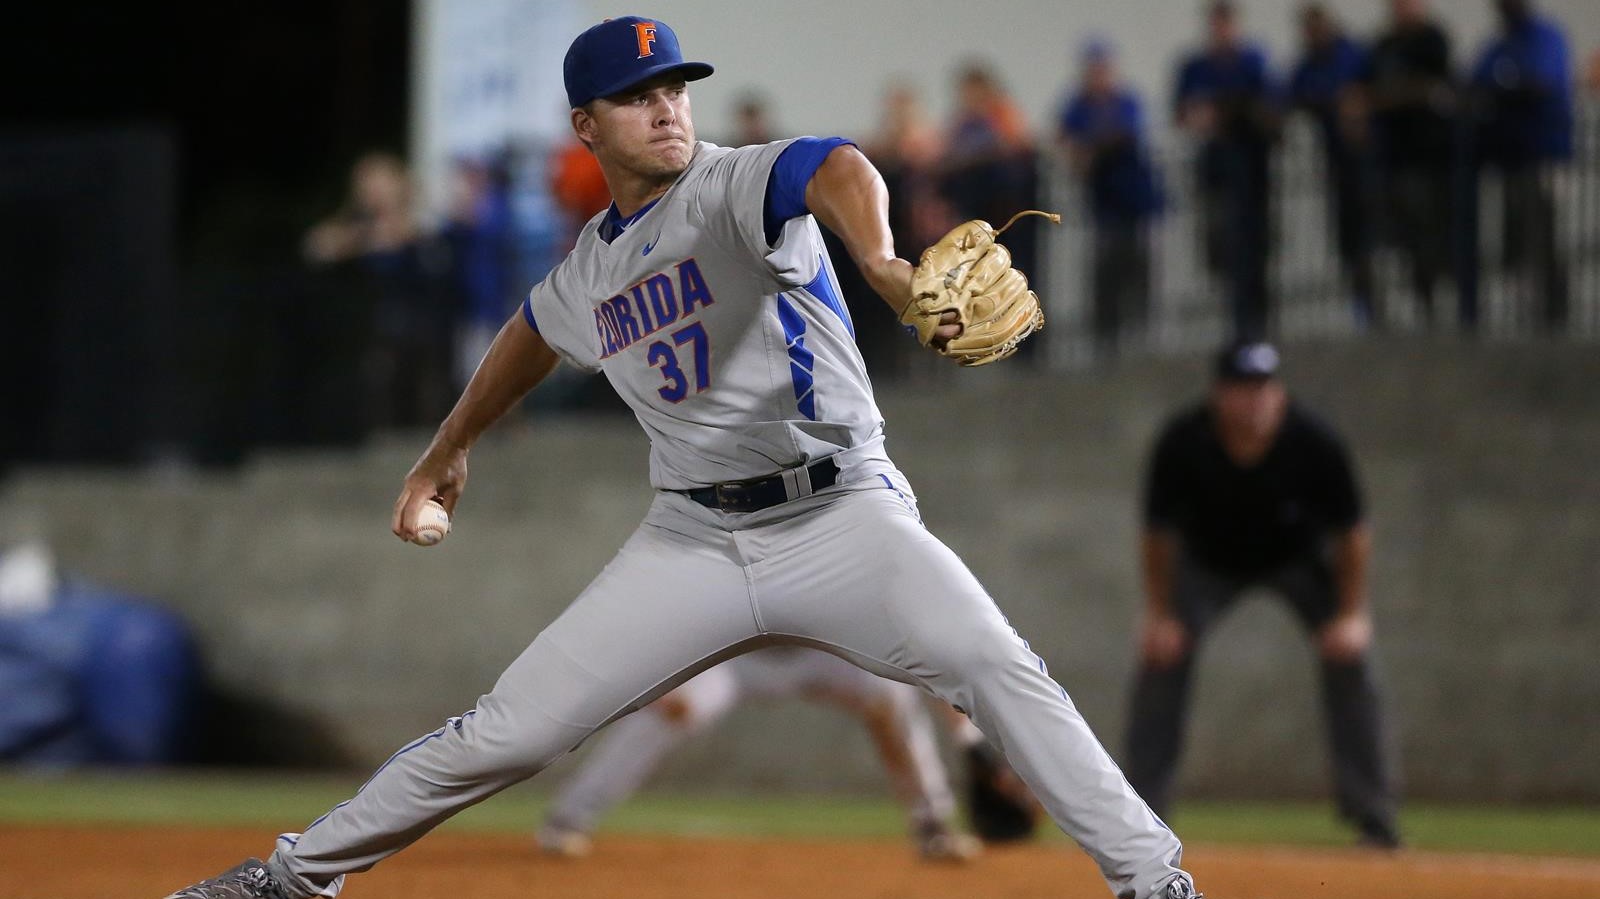 Shaun Anderson of Coral Springs pitching at the University of Florida this past spring.  Photo courtesy photo courtesy of the Florida Gators Athletic Department.